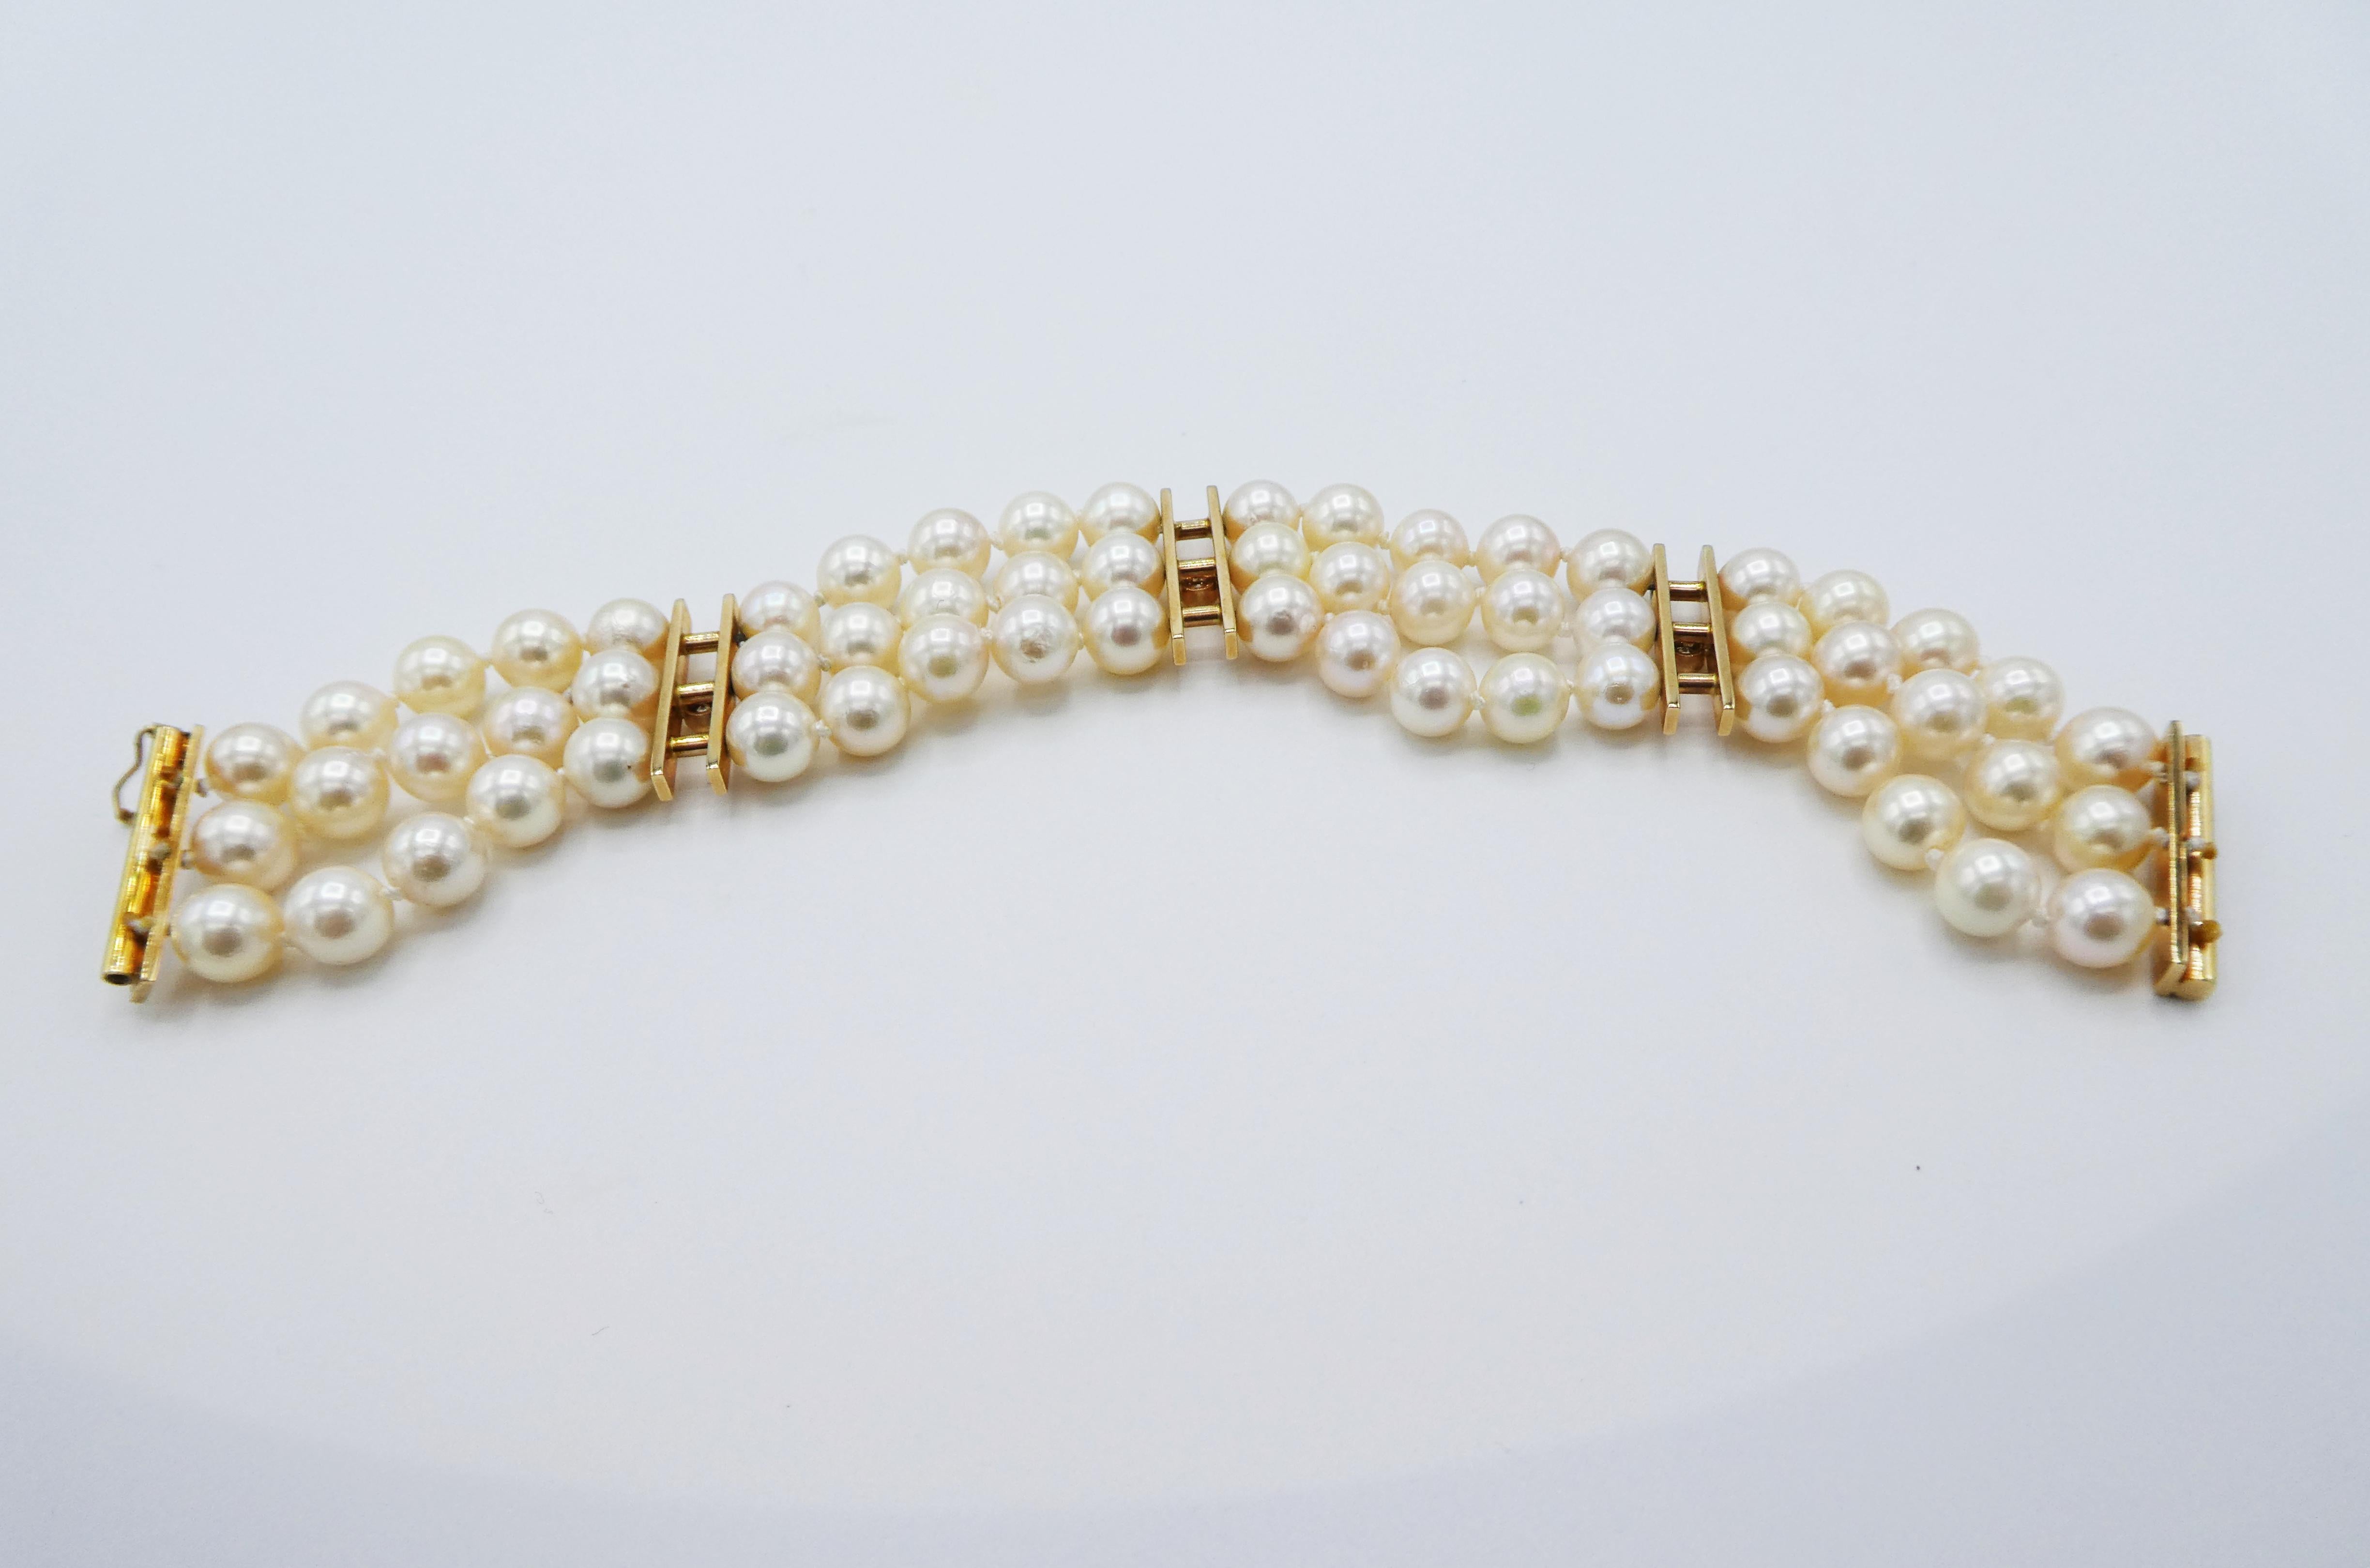 14 Karat Yellow Gold Three Row Multi Strand Cultured Pearl & Diamond Bracelet
Metal: 14k yellow gold
Weight: 34.2 grams
Diamonds: 3 round brilliant cut diamonds, approx. .20 CTW G VS
Pearls: Cultured, 6.8MM white with a creamy luster 
Length: 6.5